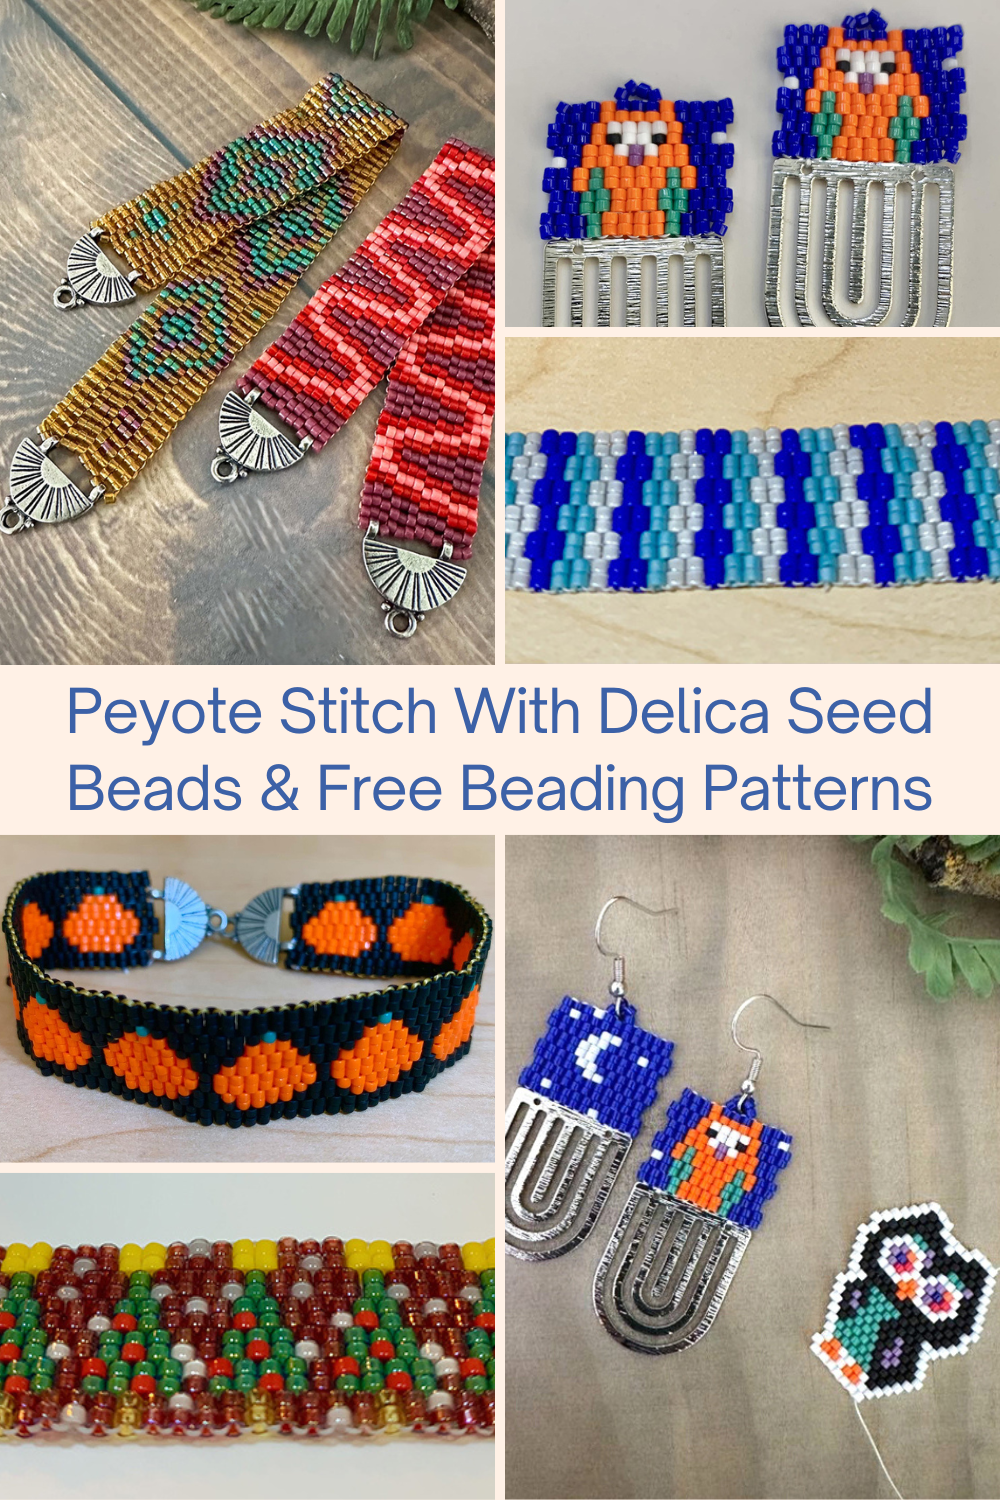 Peyote Stitch With Delica Seed Beads & Free Beading Patterns Collage